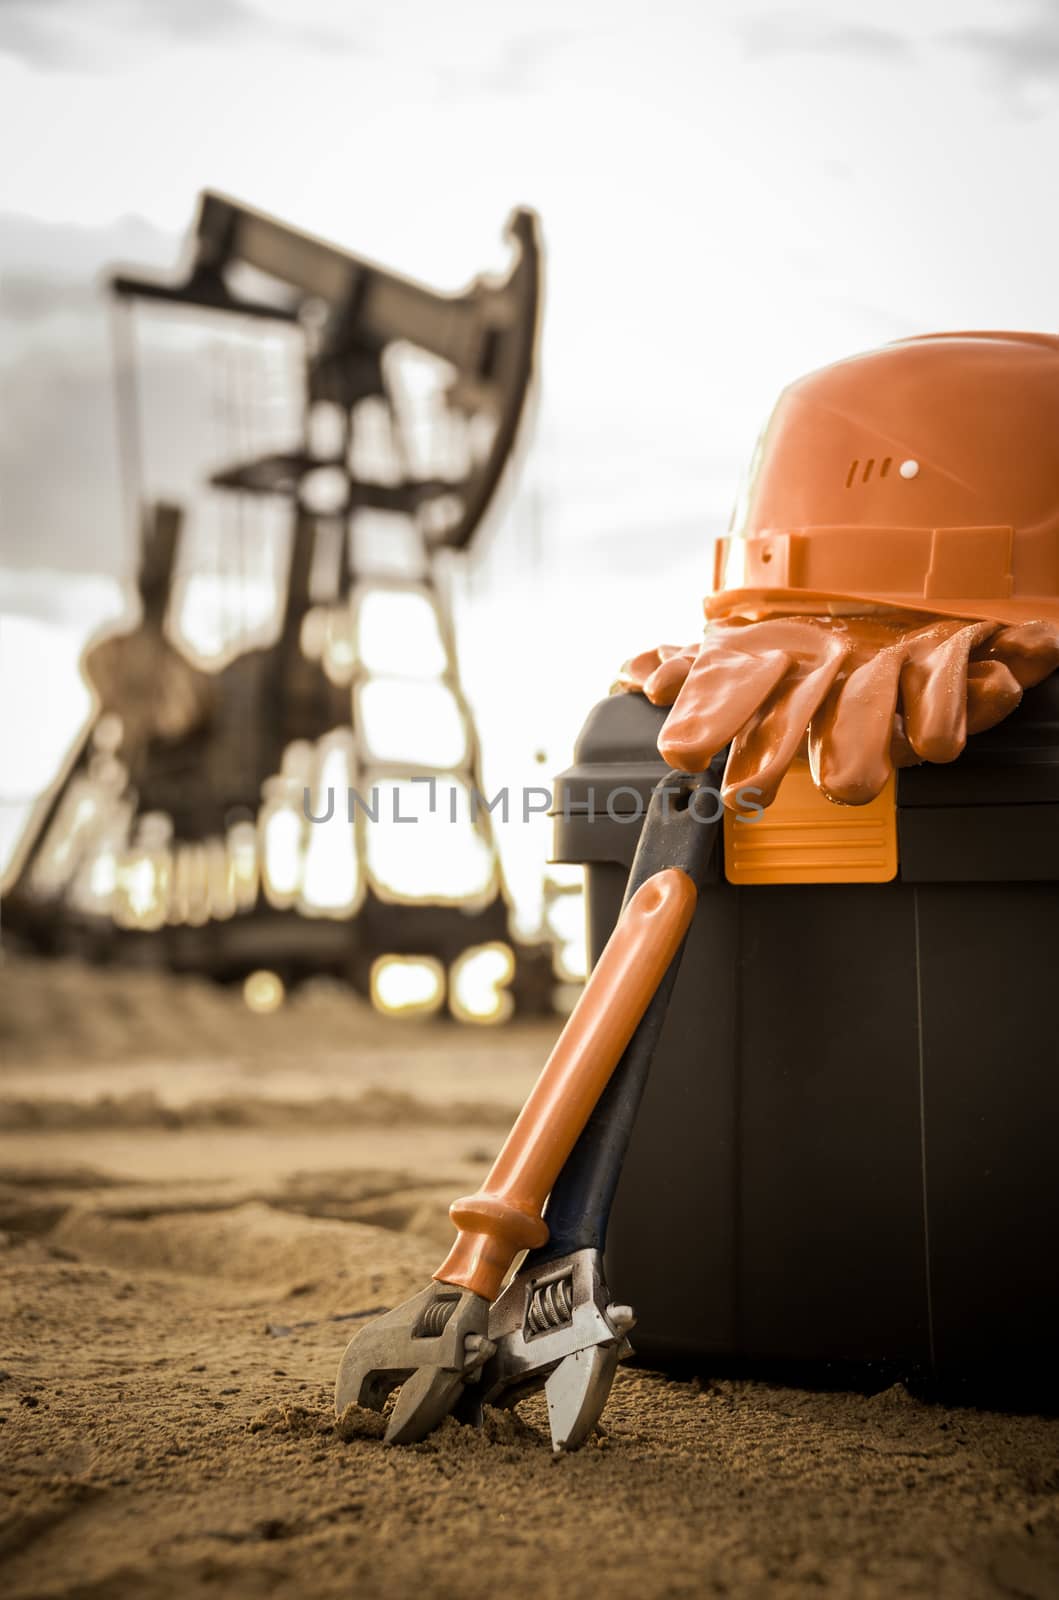 Equipment and tool box on a industrial site background. Oil and gas industry. Small depth of field. Toned.